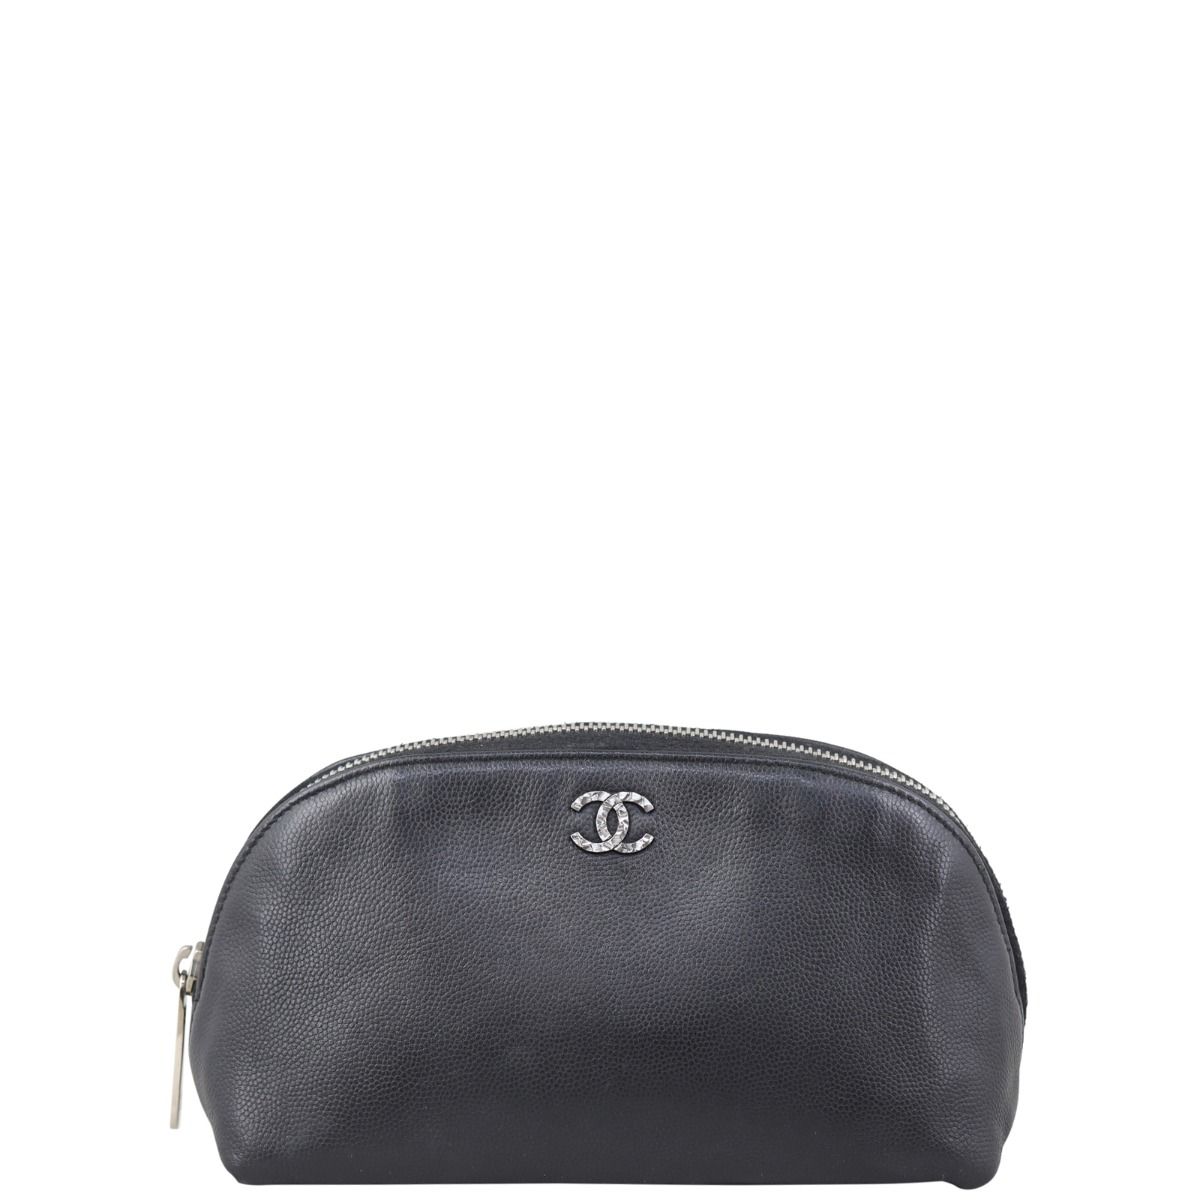 CHANEL WHITE Cosmetics Makeup Bag Clutch